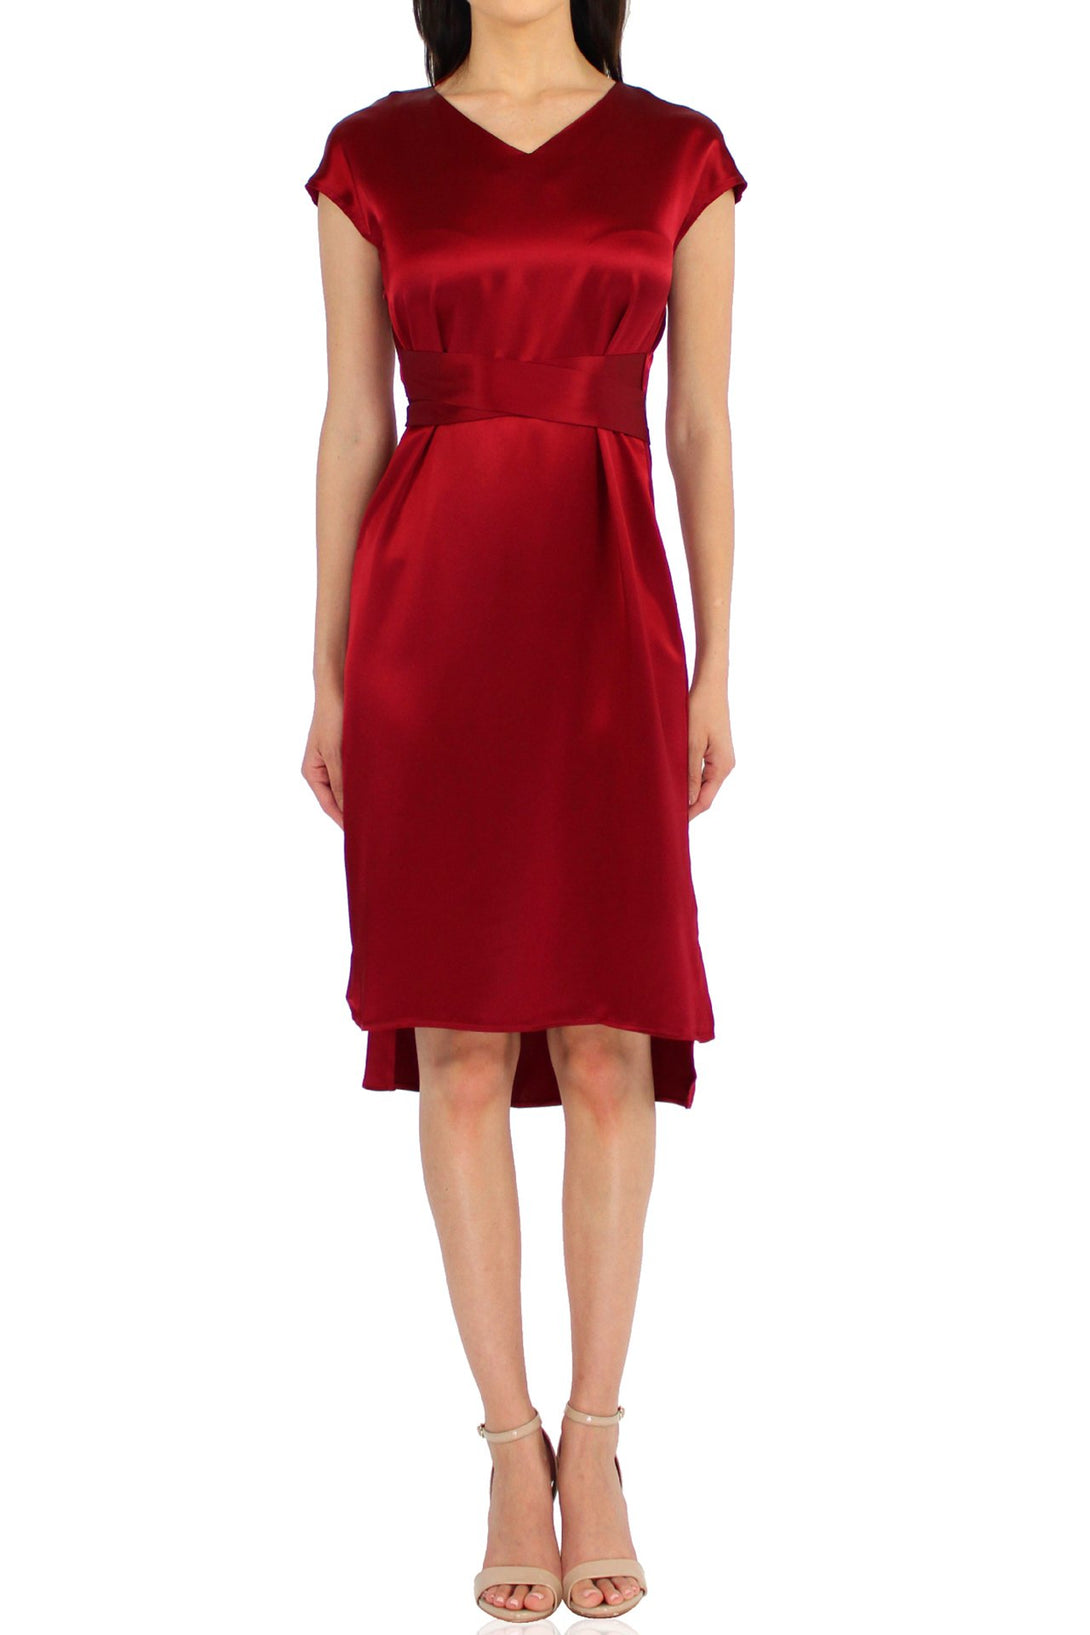 Women-Designer-Belted-Mini-Dress-In-Red-By-Kyle-Richards